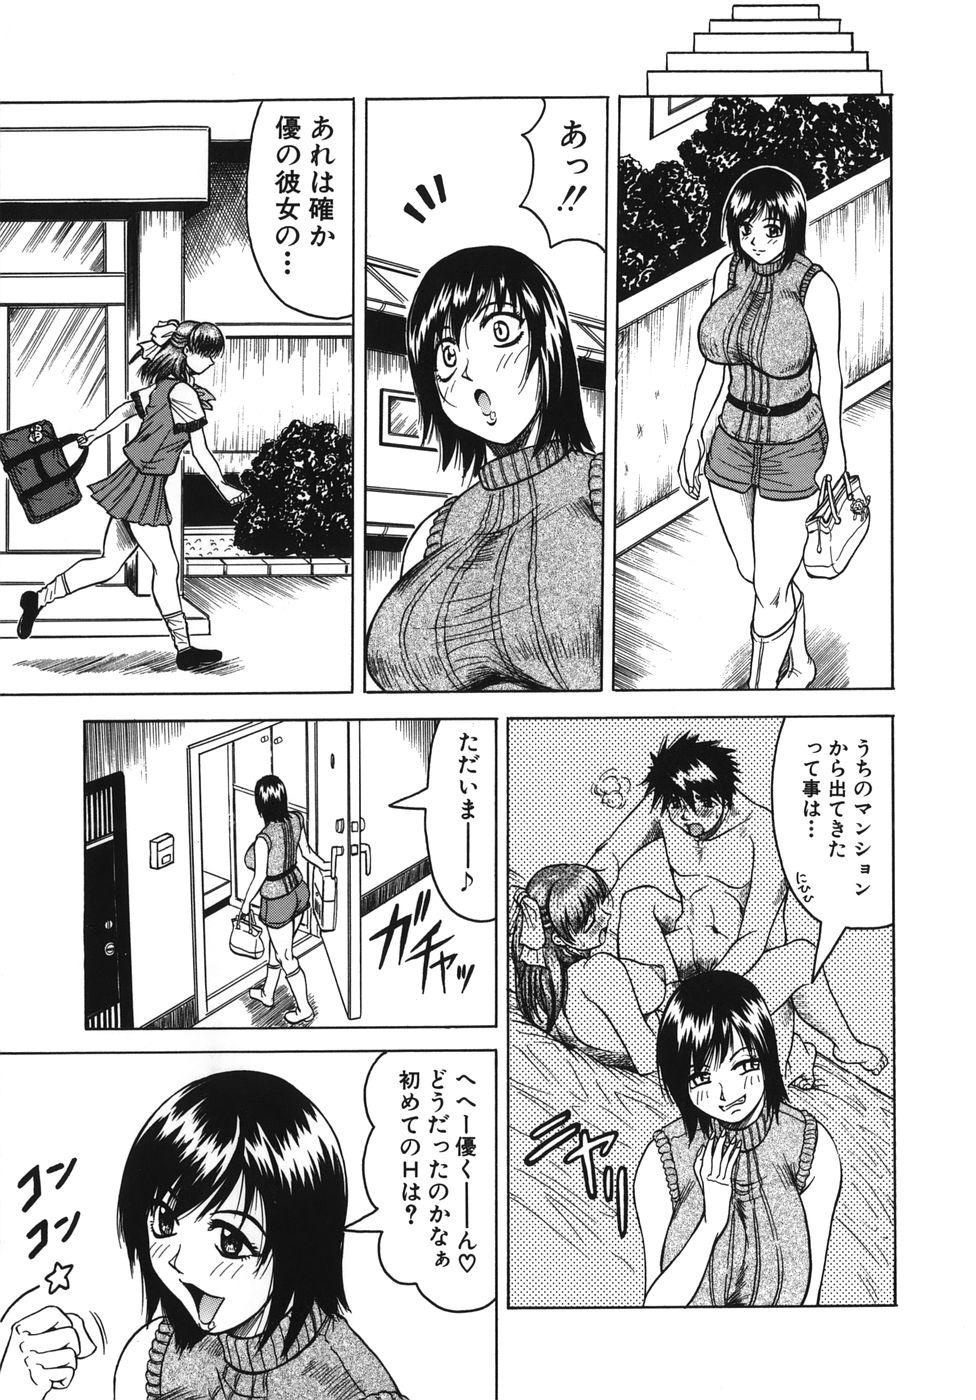 Petite [Jamming] Onee-chan ni Omakase - Leave to Your Elder Sister Jerking Off - Page 11